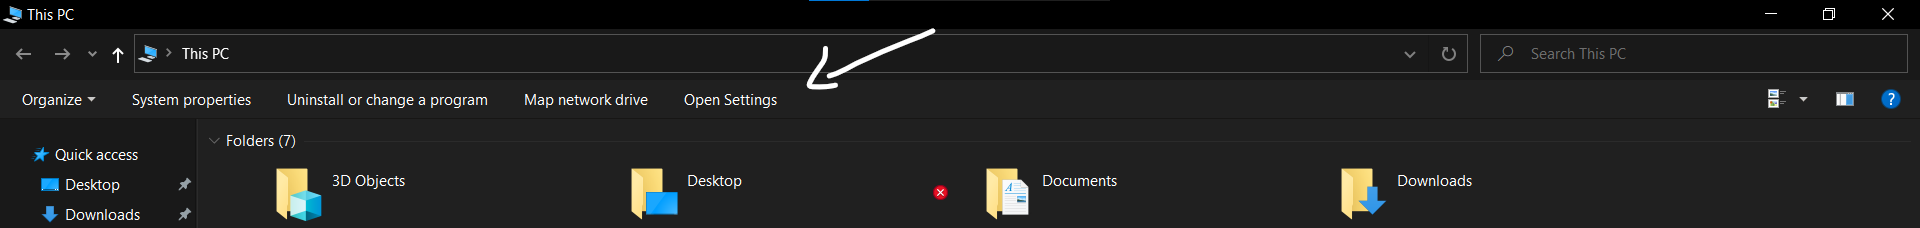 File Explorer ribbon replaced like windows 7 style eeccce1d-64fc-463a-af38-59bd8d444271?upload=true.png